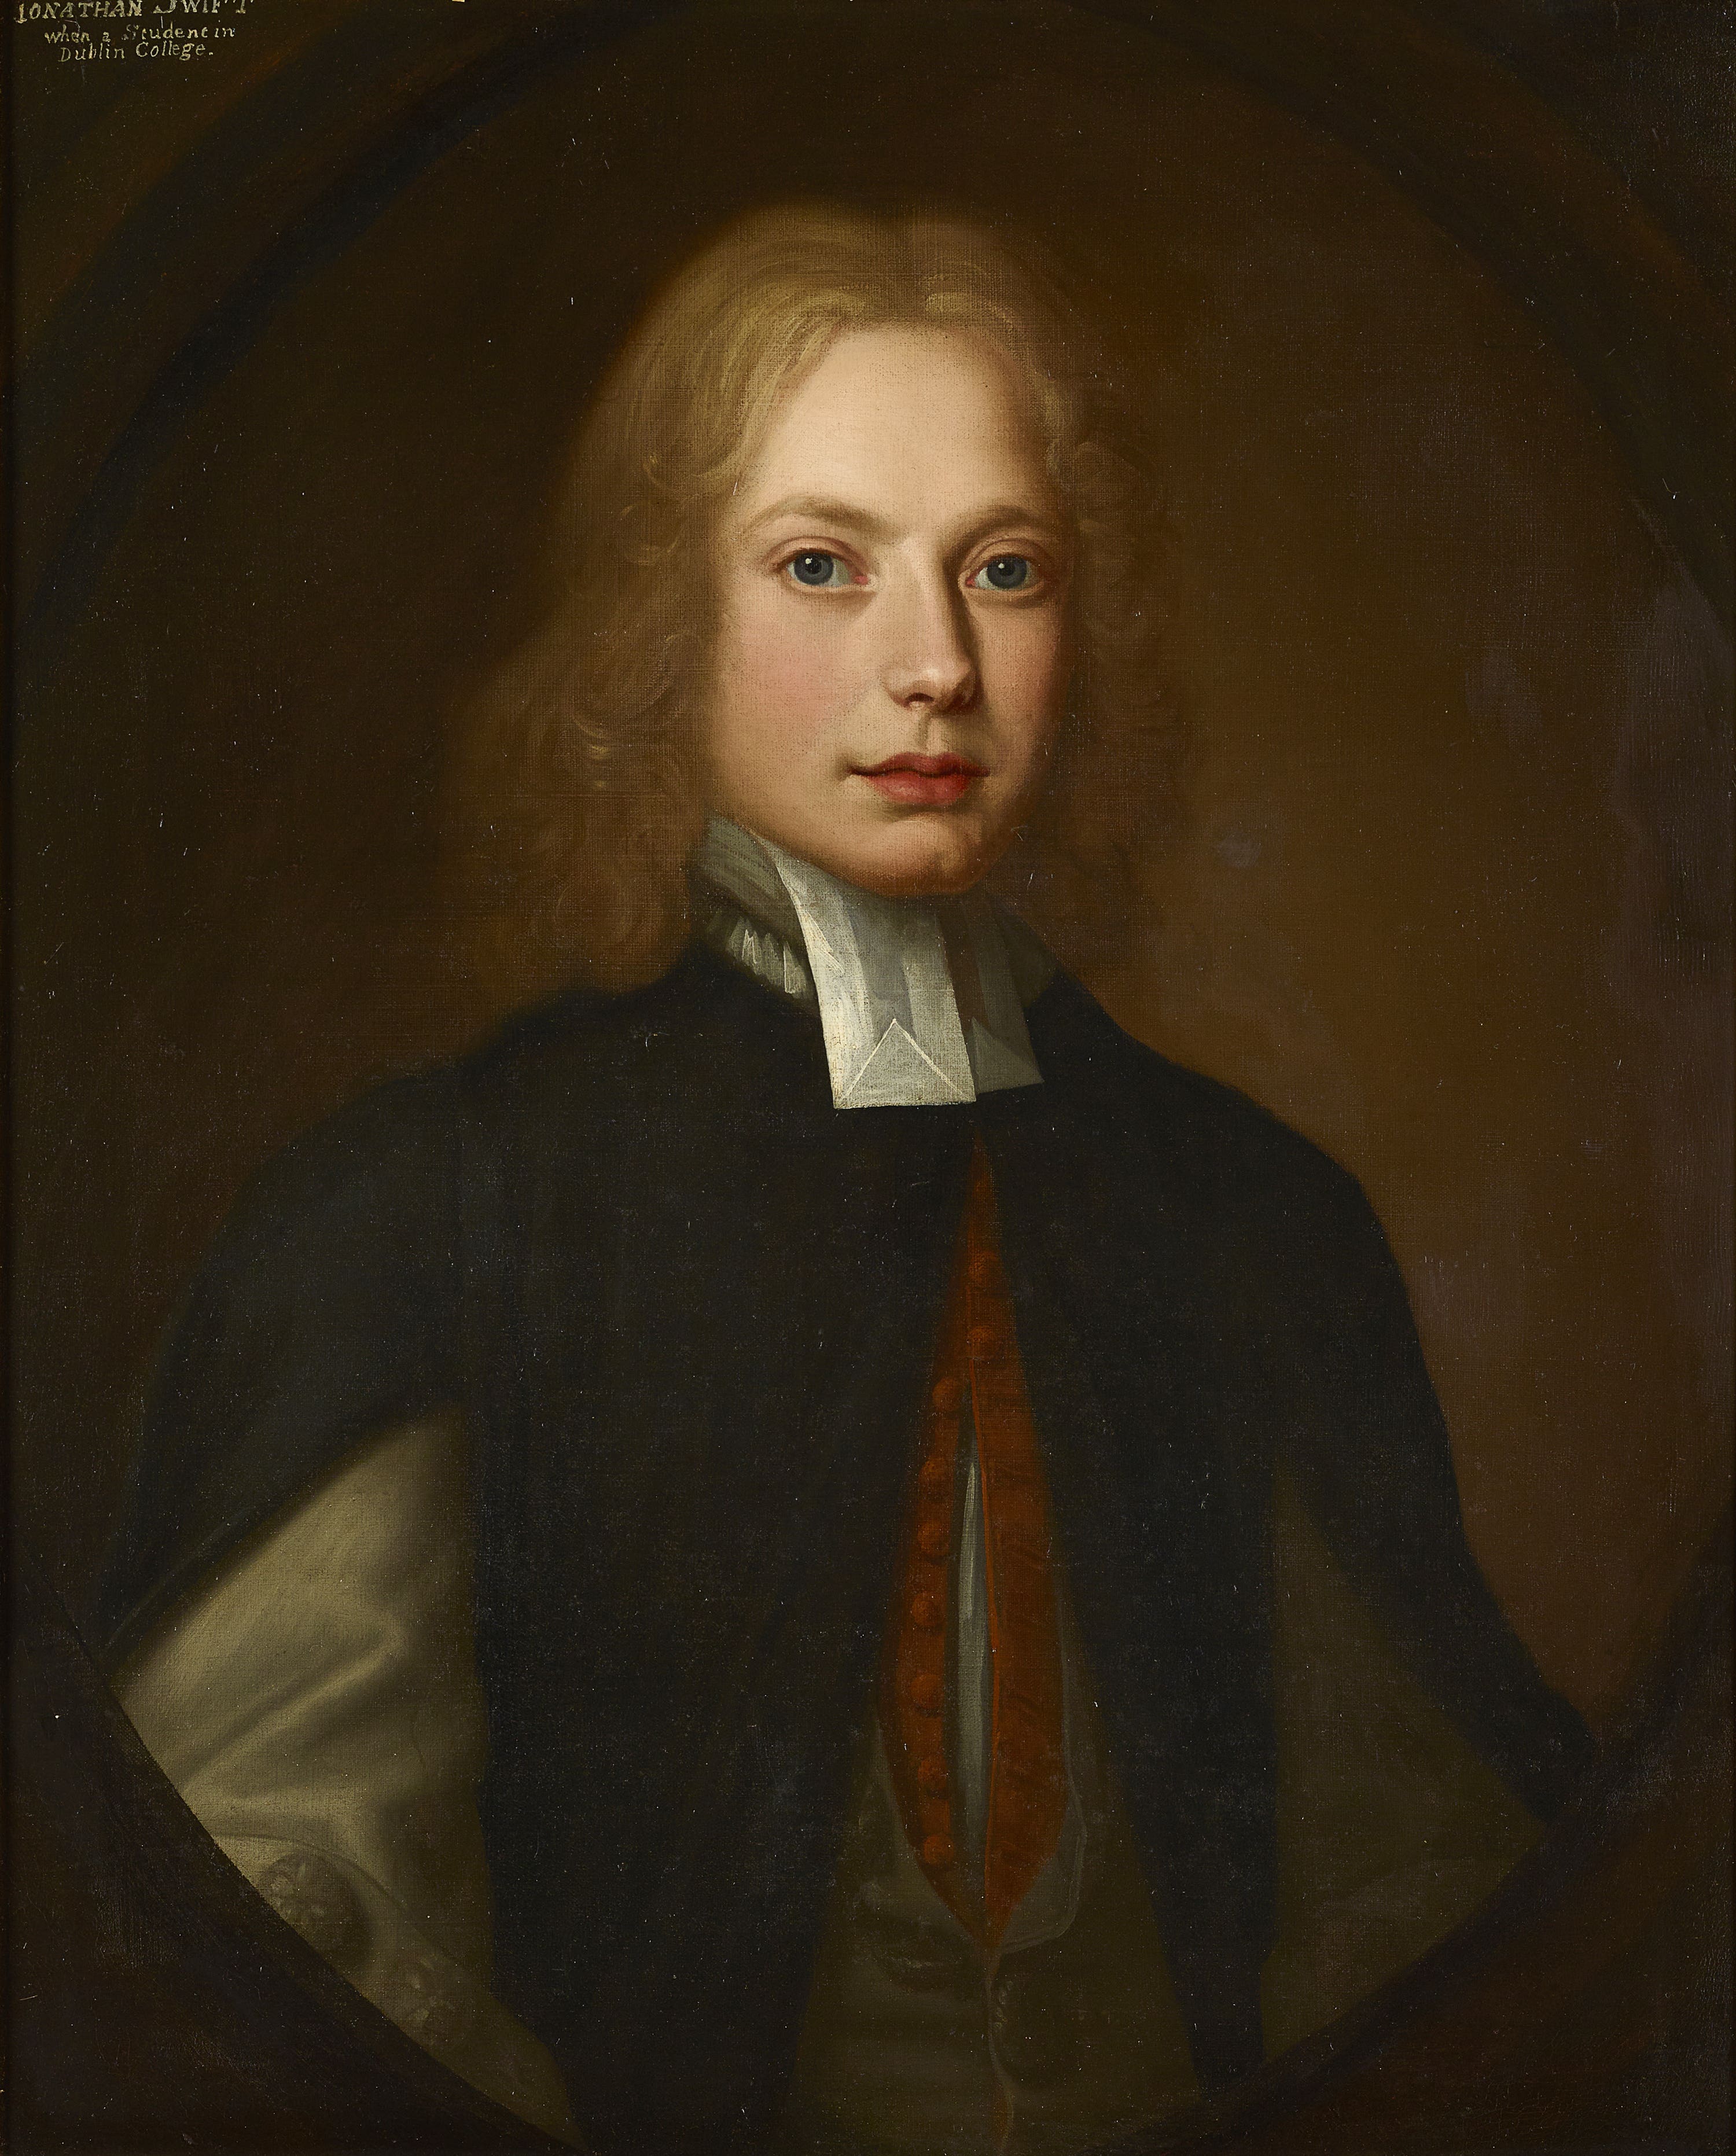 Swift is believed to be only 16 years old in the painting. 